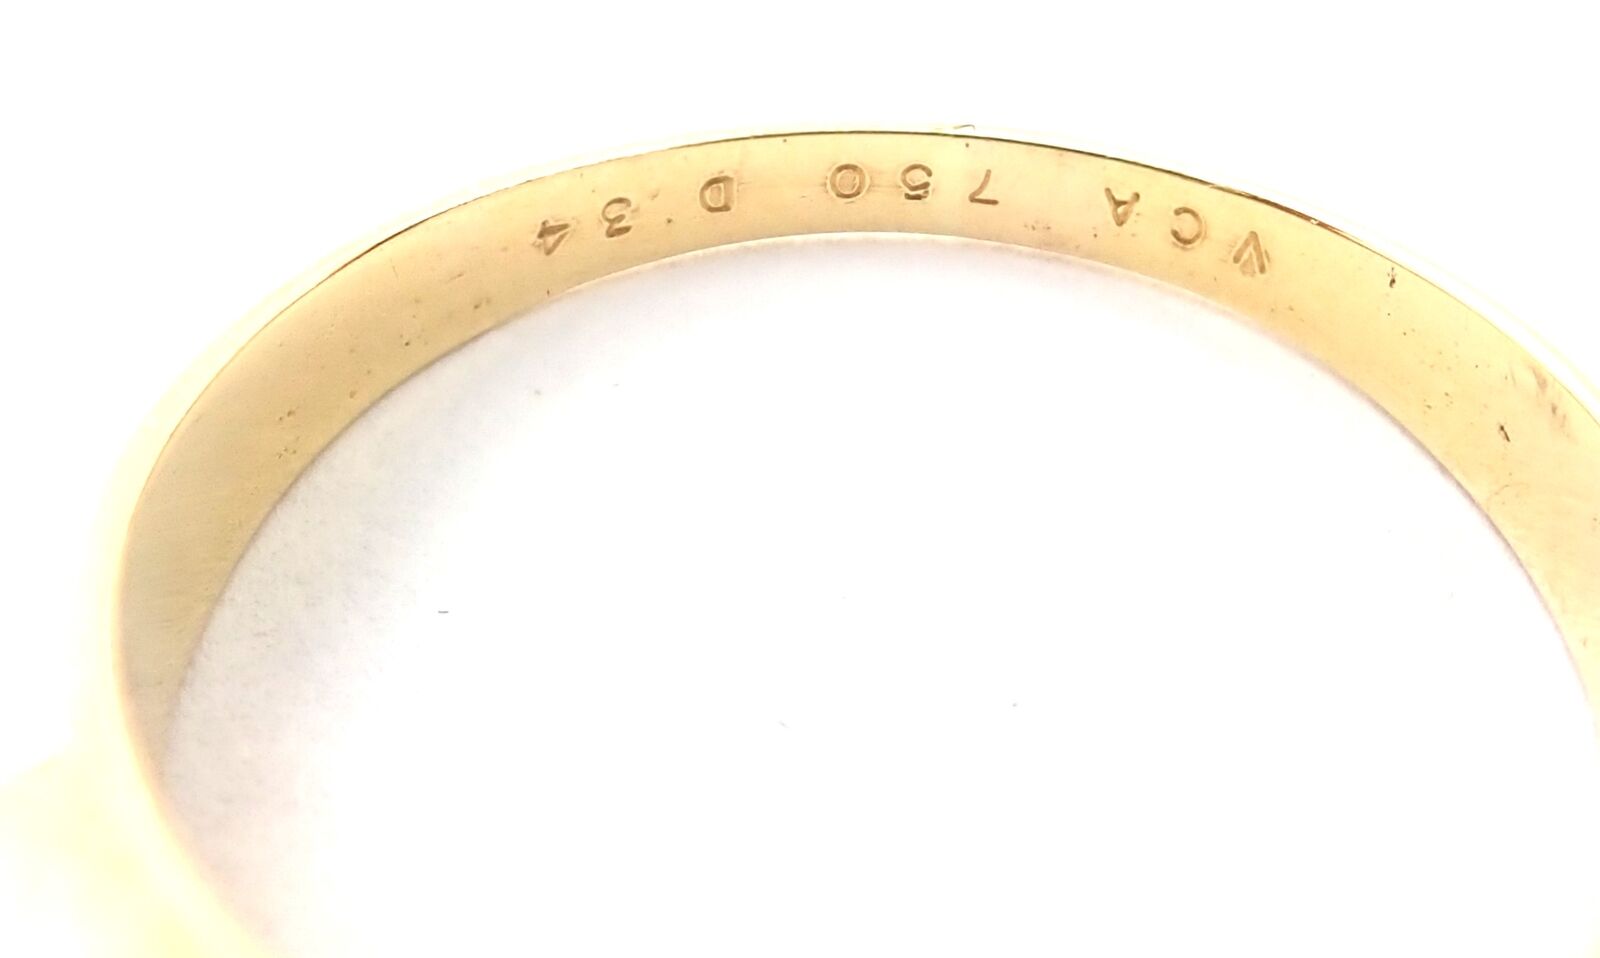 Van Cleef & Arpels Jewelry & Watches:Fine Jewelry:Rings Rare! Authentic Vintage Van Cleef & Arpels 18k Yellow Gold Diamond Band Ring